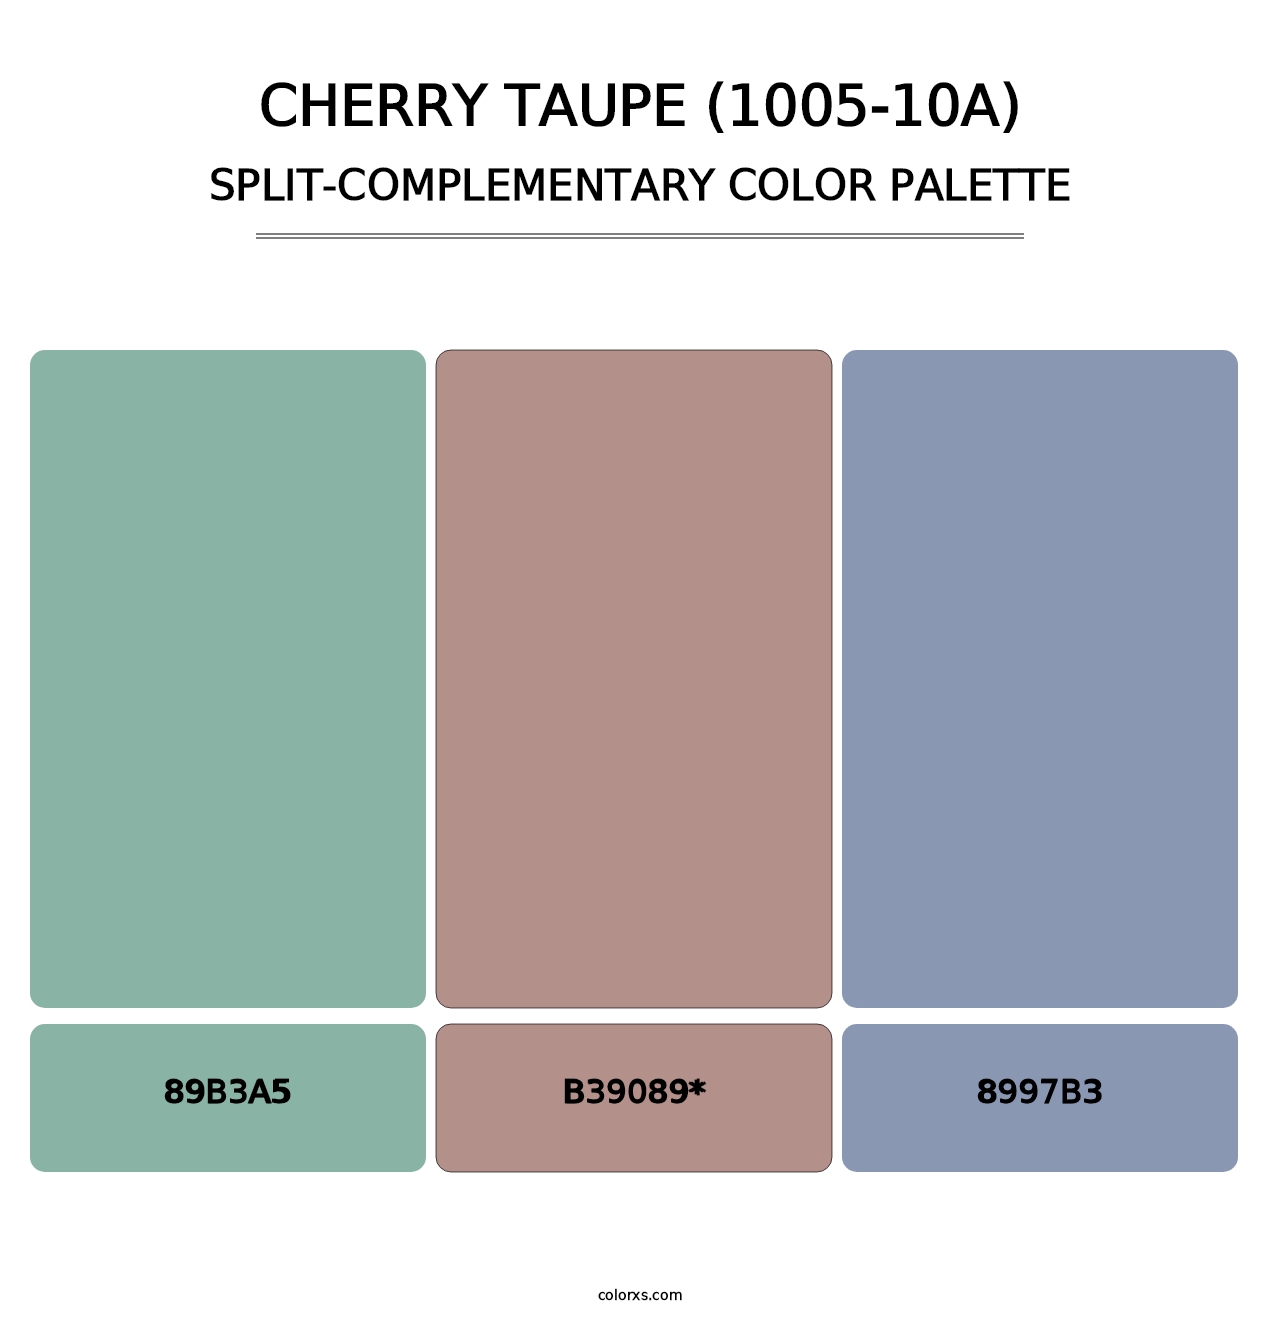 Cherry Taupe (1005-10A) - Split-Complementary Color Palette